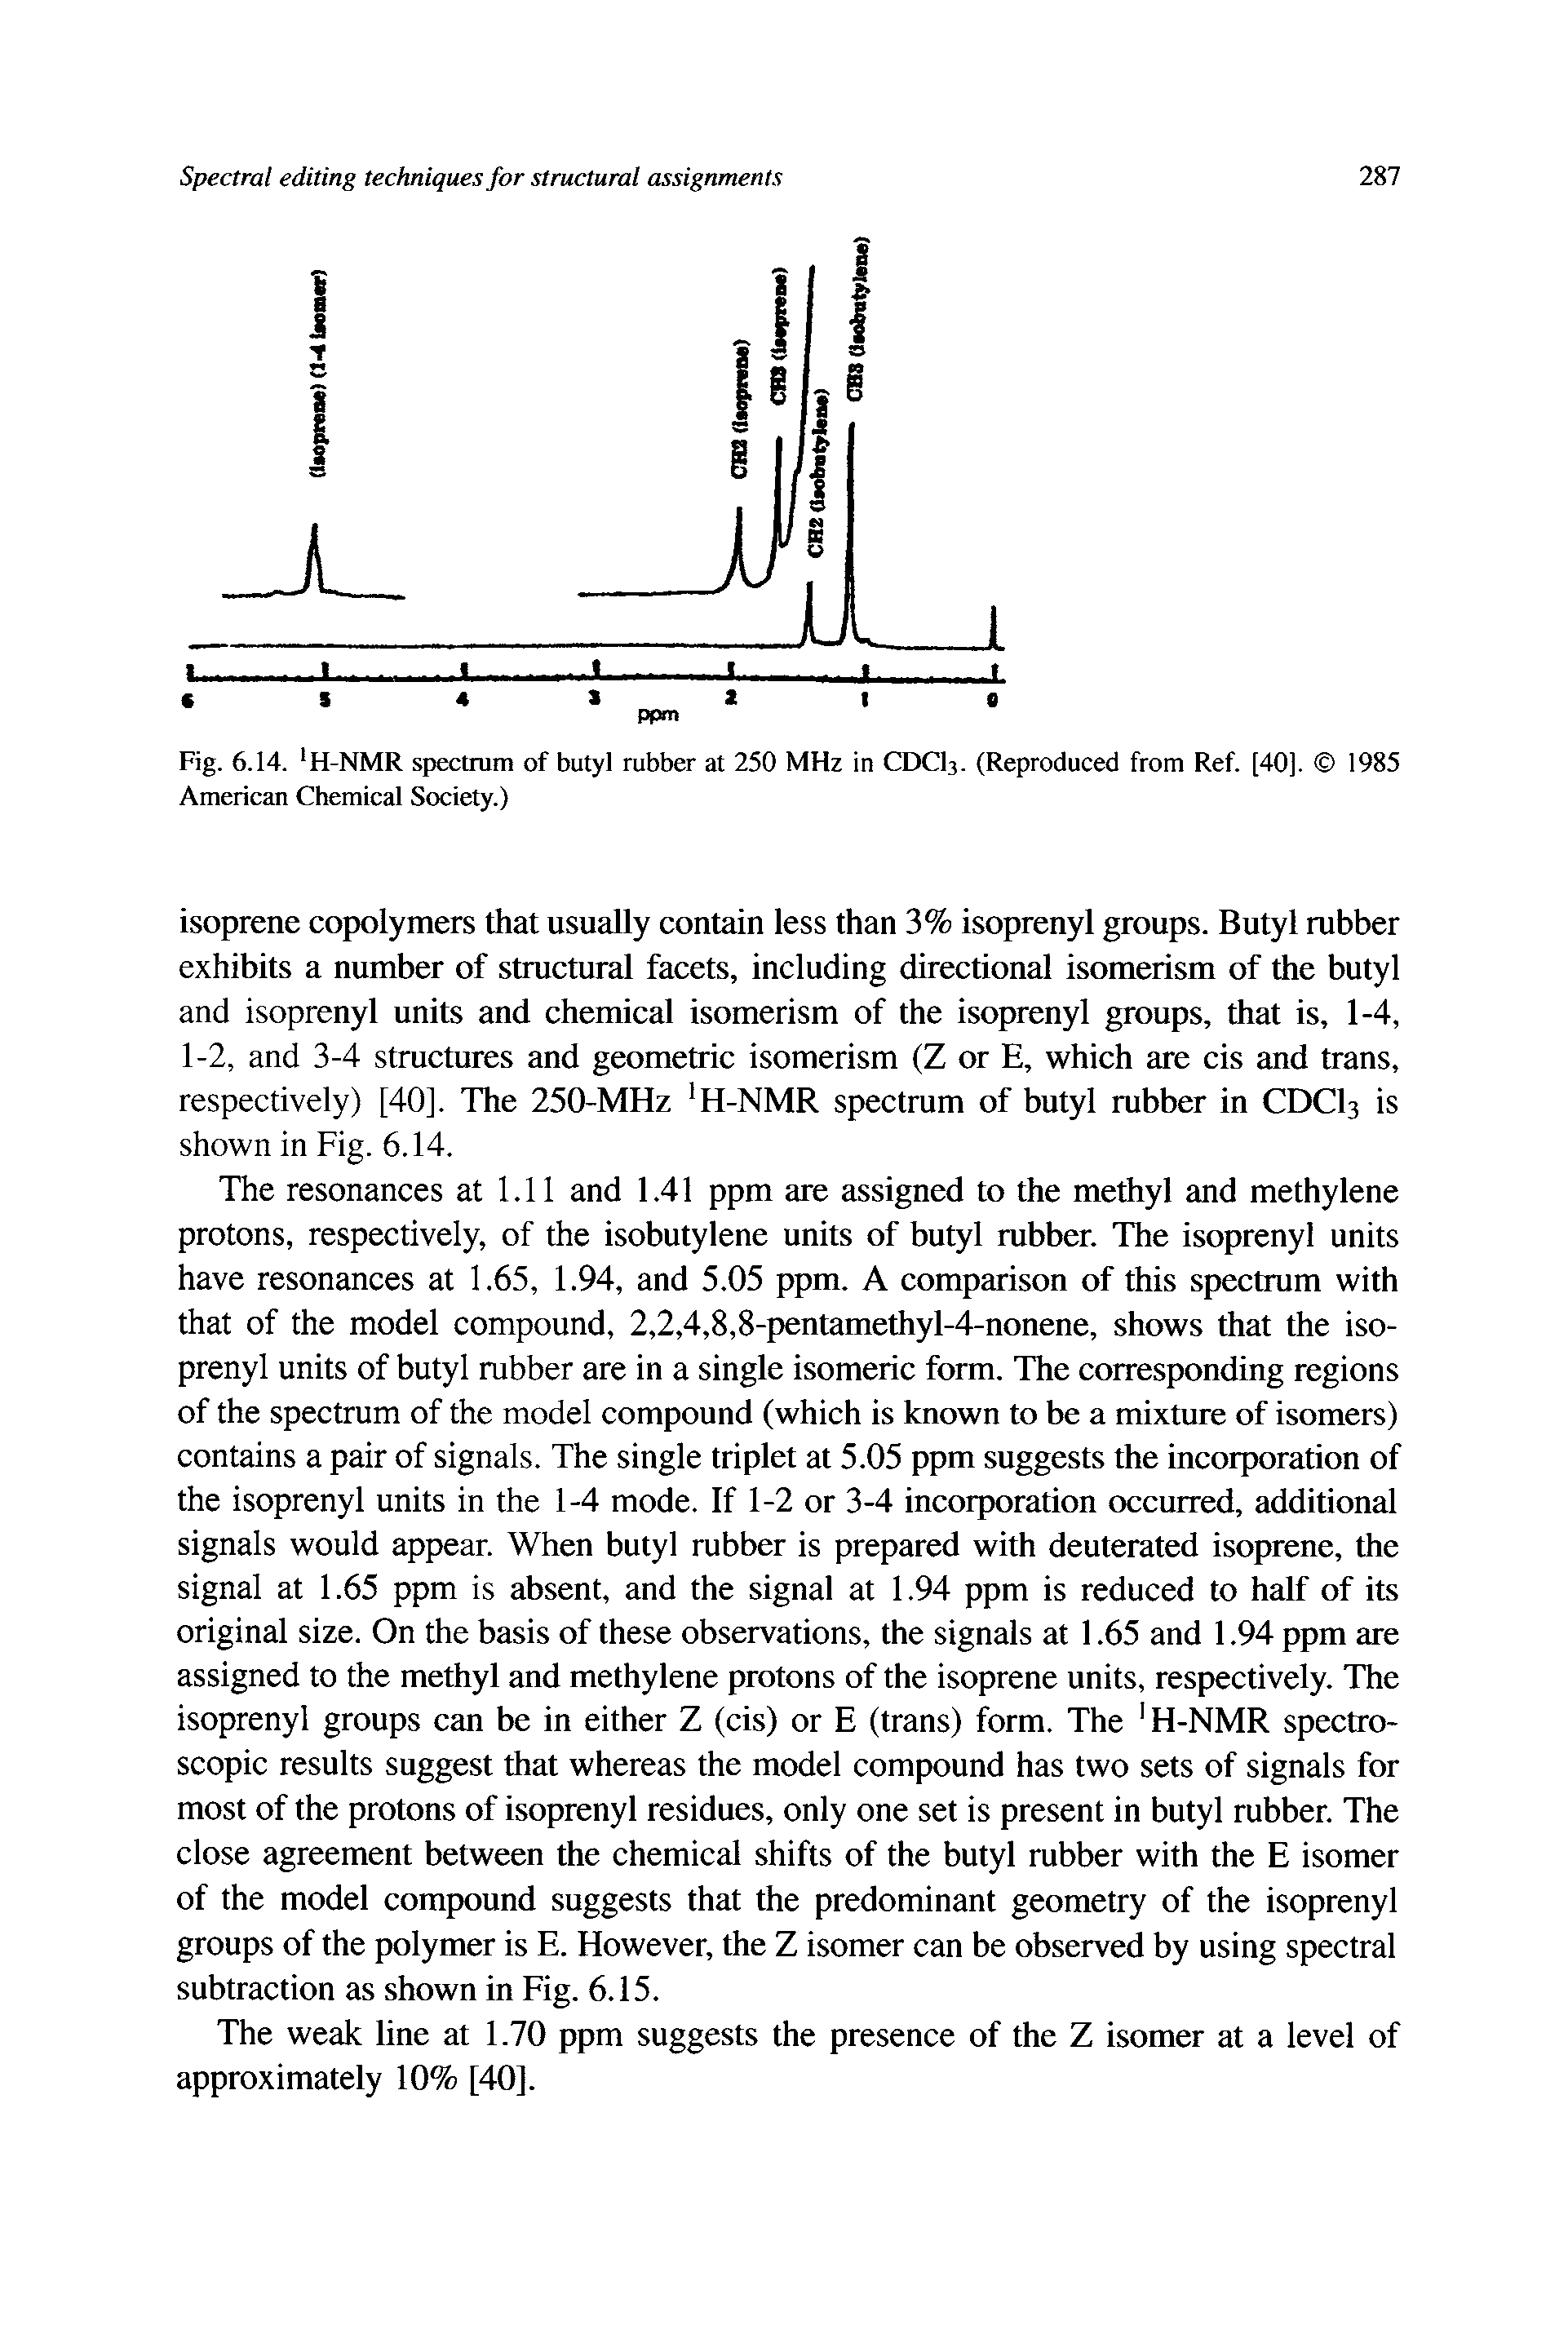 Fig. 6.14. H-NMR spectrum of butyl rubber at 250 MHz in CDCI3. (Reproduced from Ref. [40]. 1985 American Chemical Society.)...